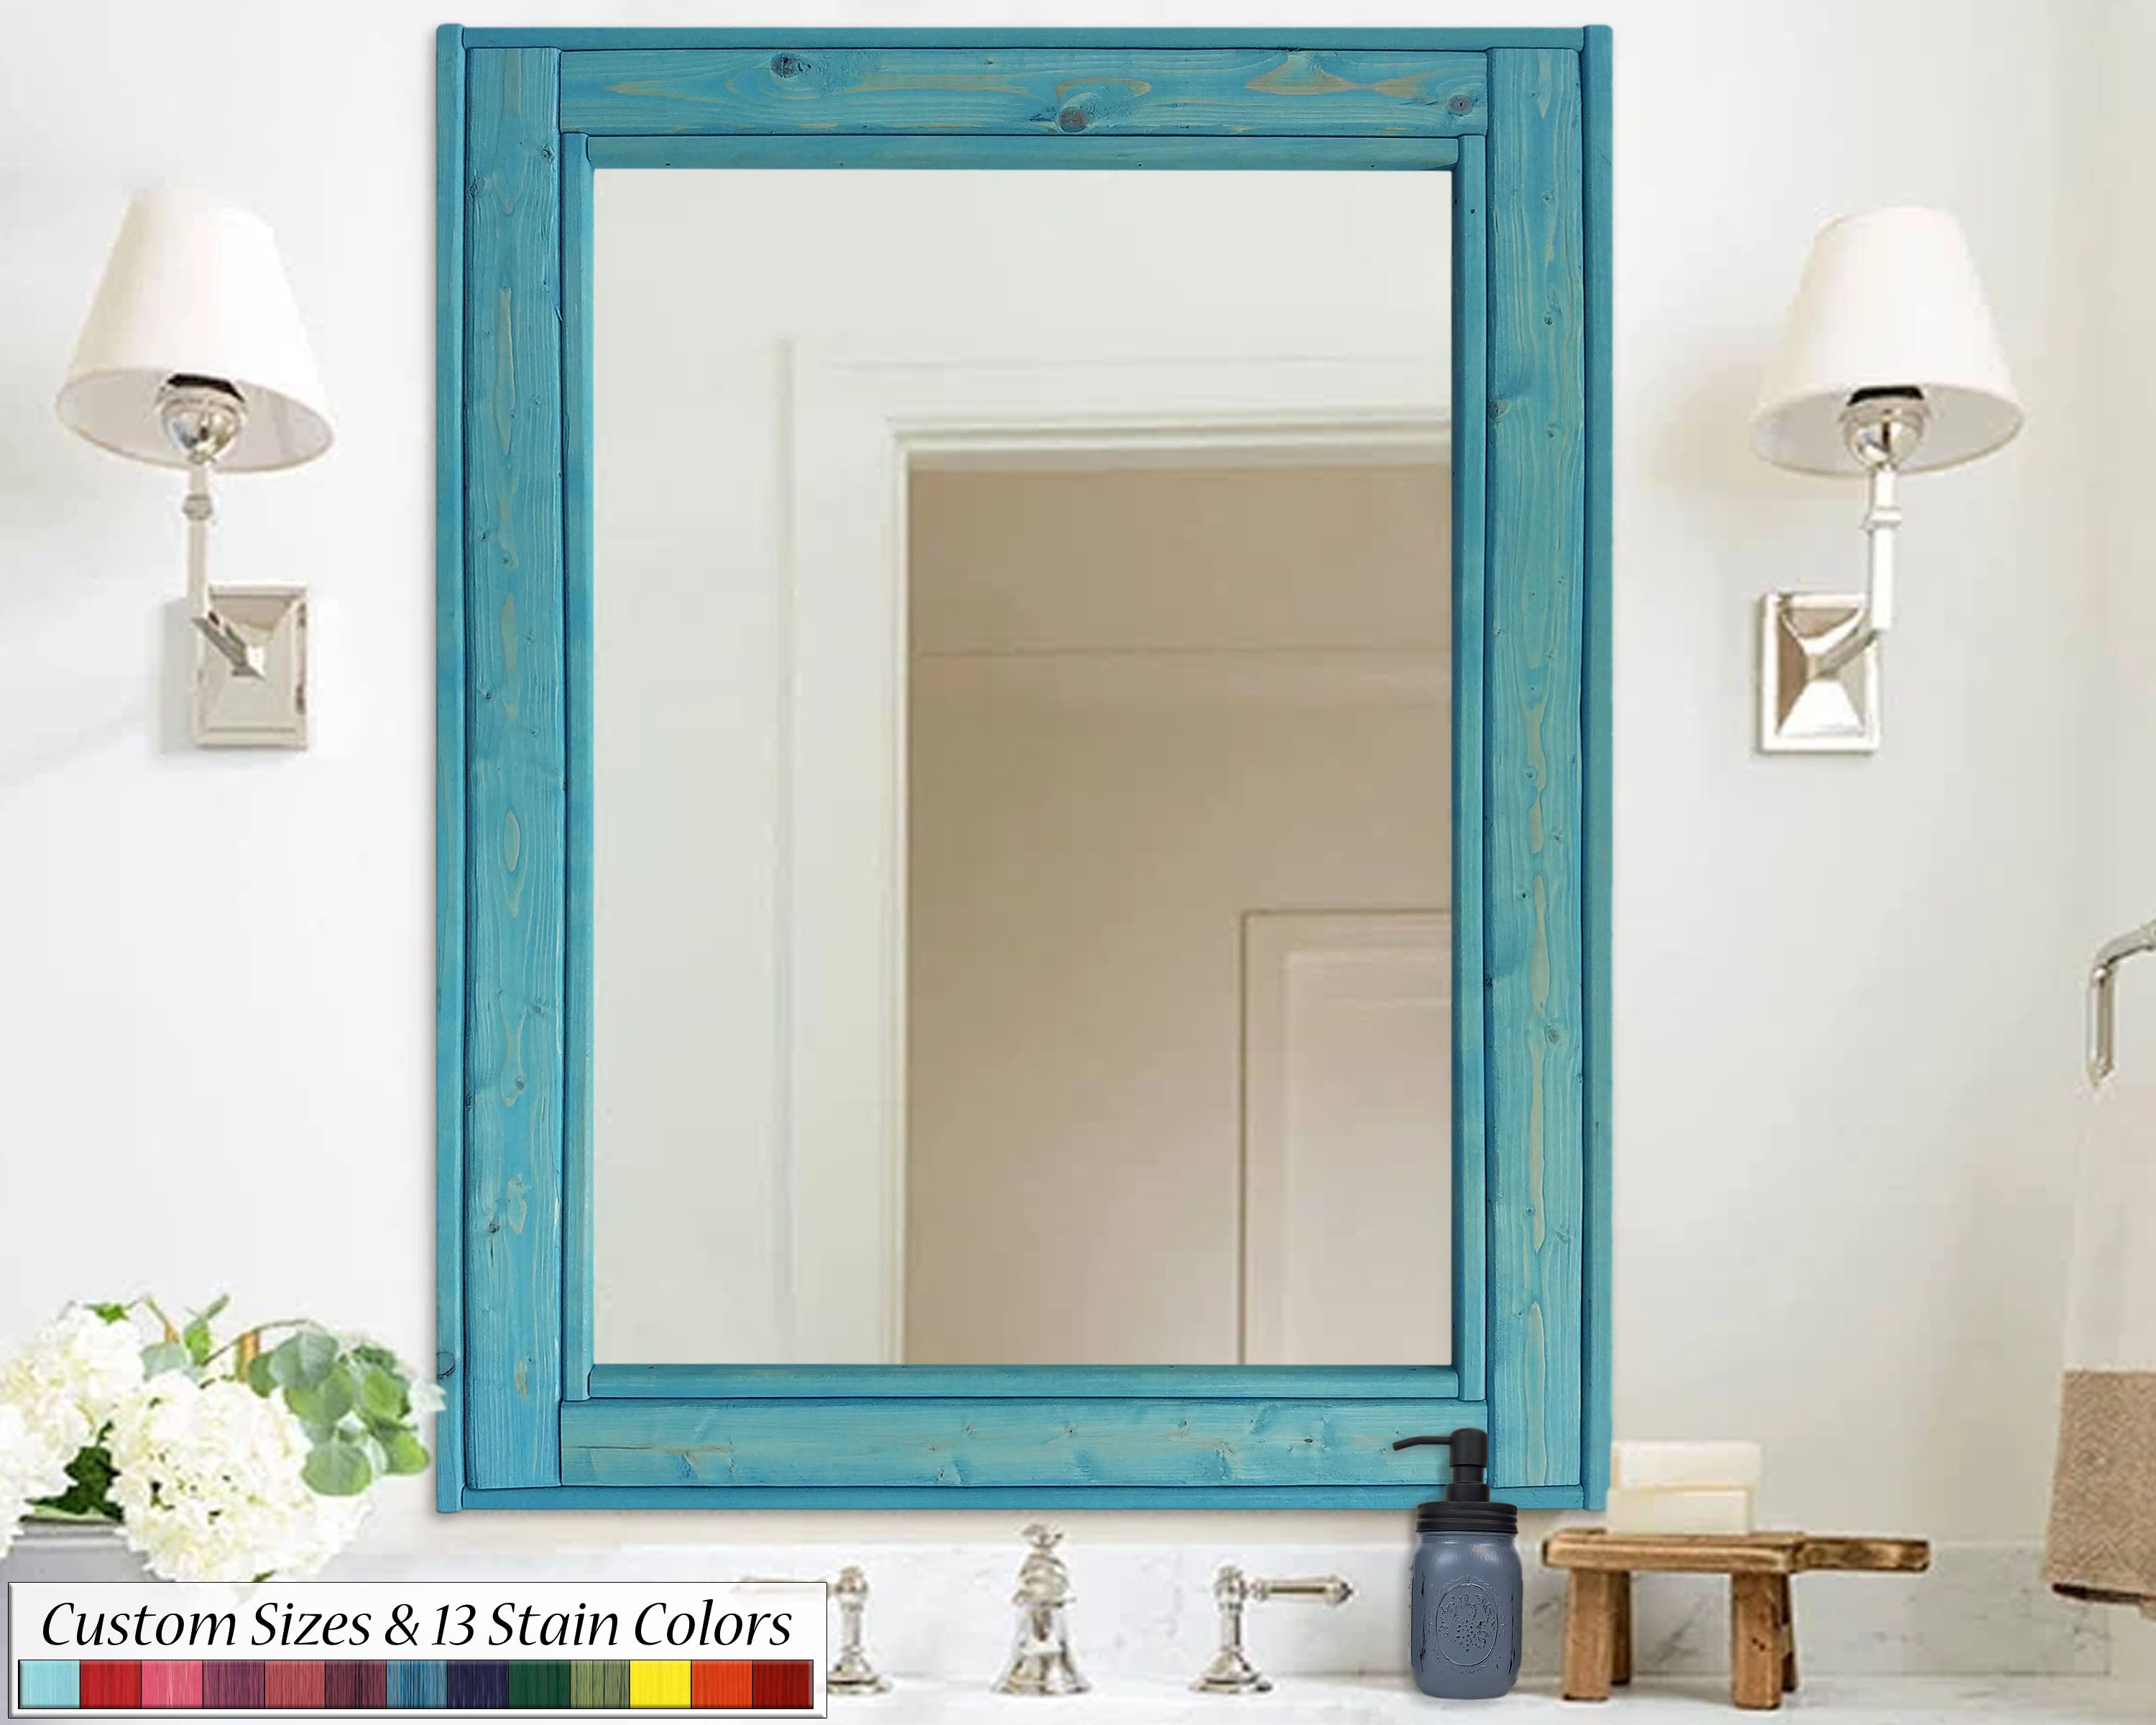 Herringbone Reclaimed Styled Wood Mirror, 5 Sizes & 13 Stain Colors by Lane of Lenore